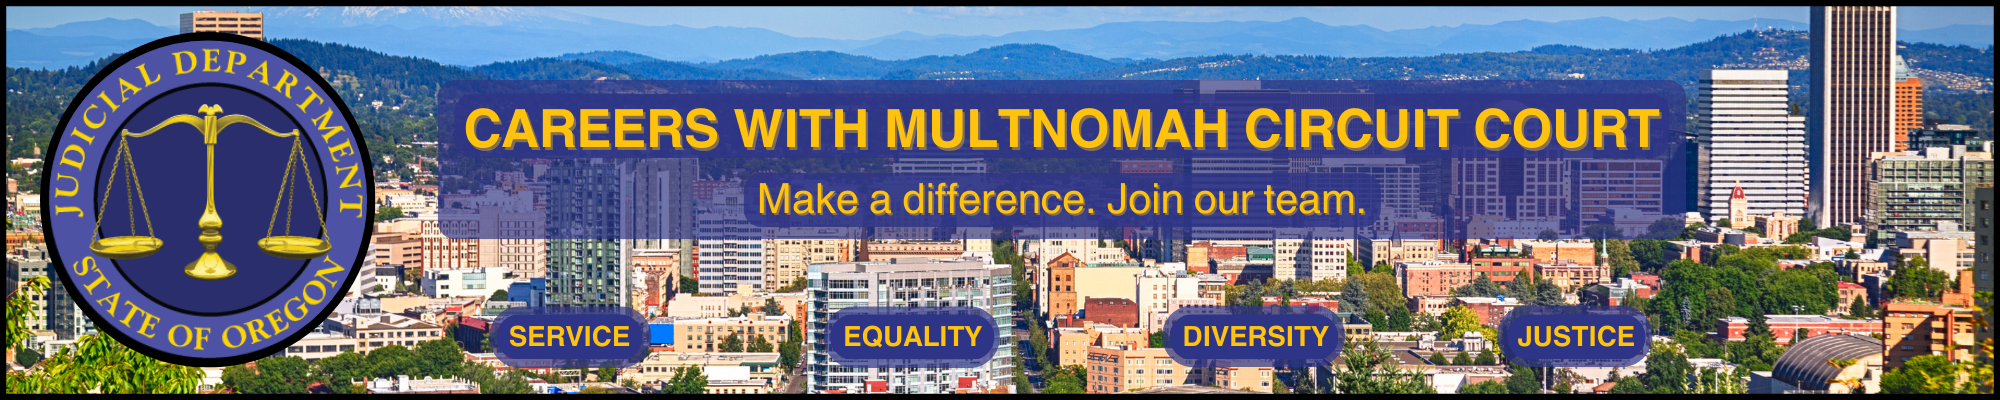 Banner with a logo of the OJD, careeers with Multnohmah circuit court. sub heading make a difference join our team. Also the words service, equality, diversity, justice